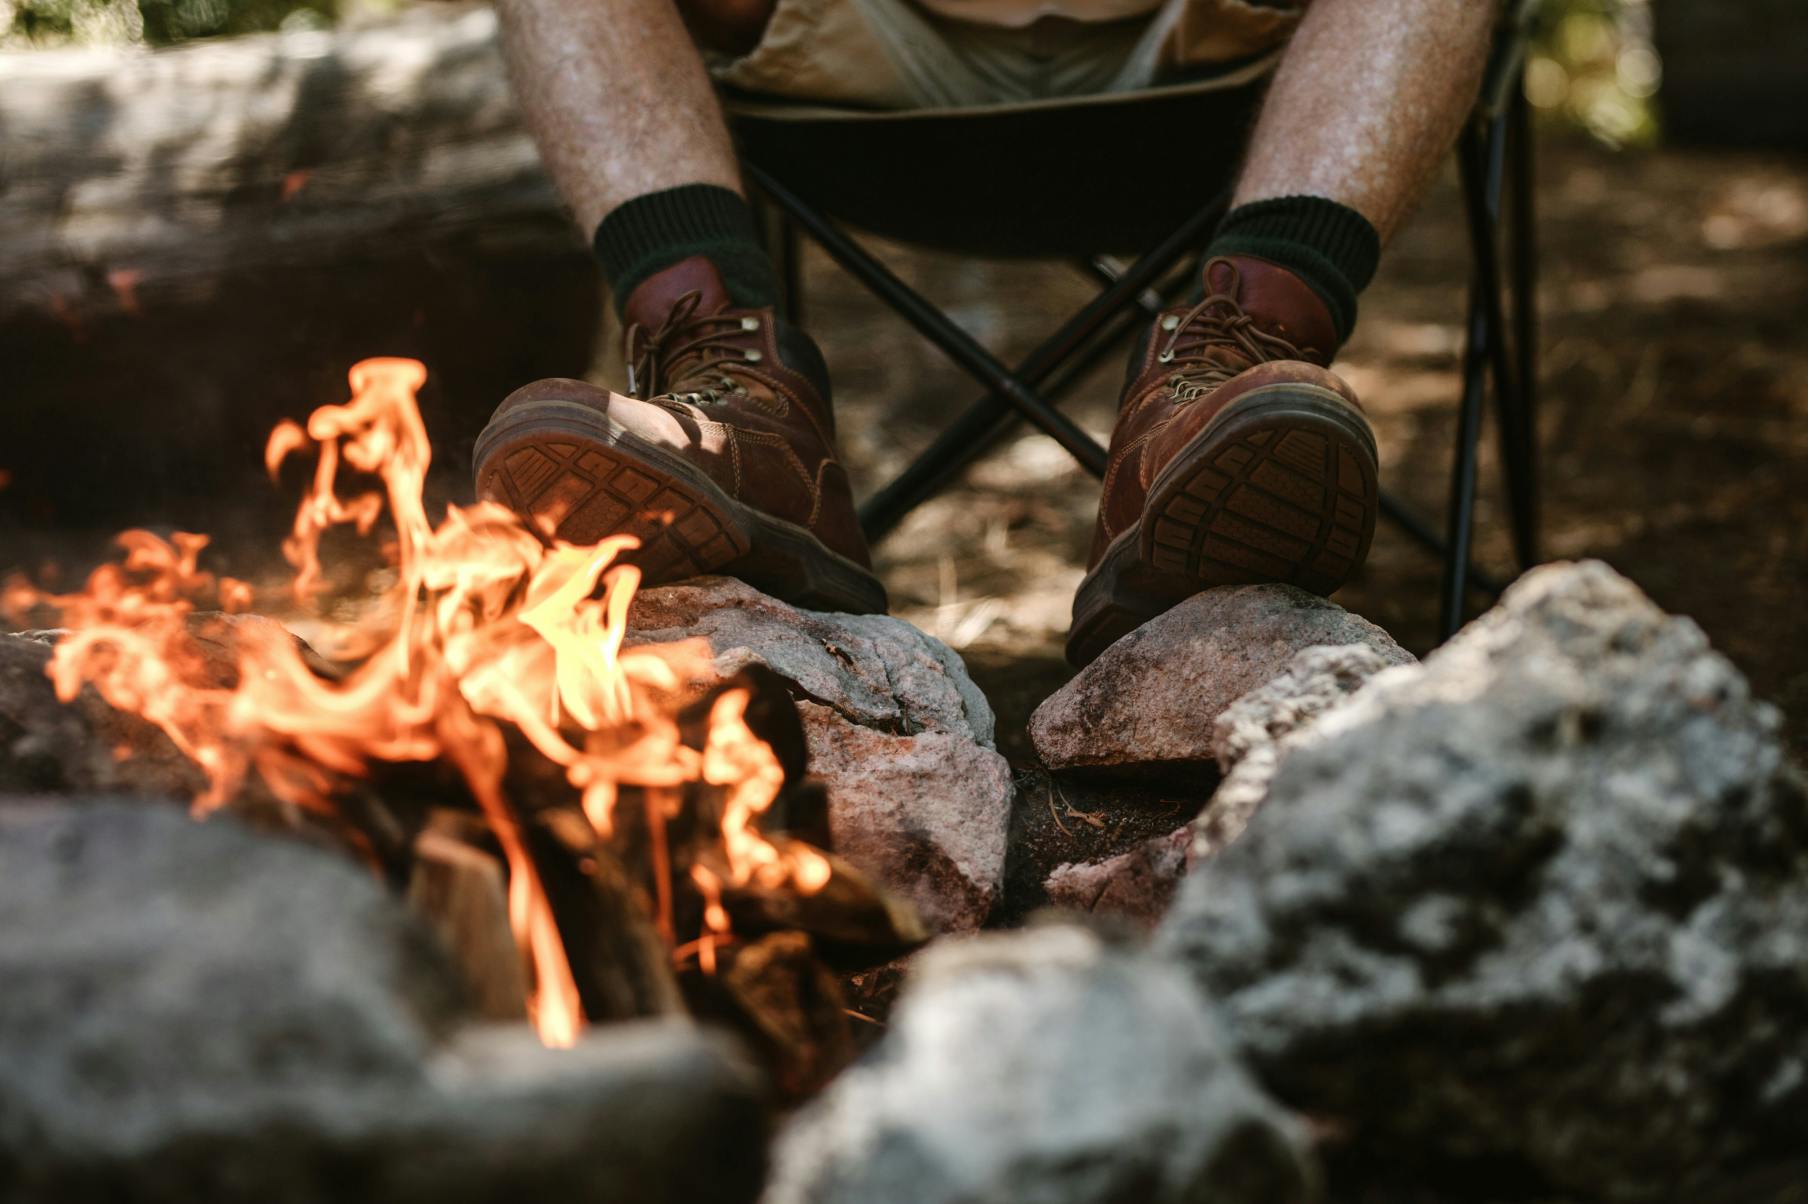 Boots resting on rocks by a campfire - Engage with First Nations stories in the Larapinta region